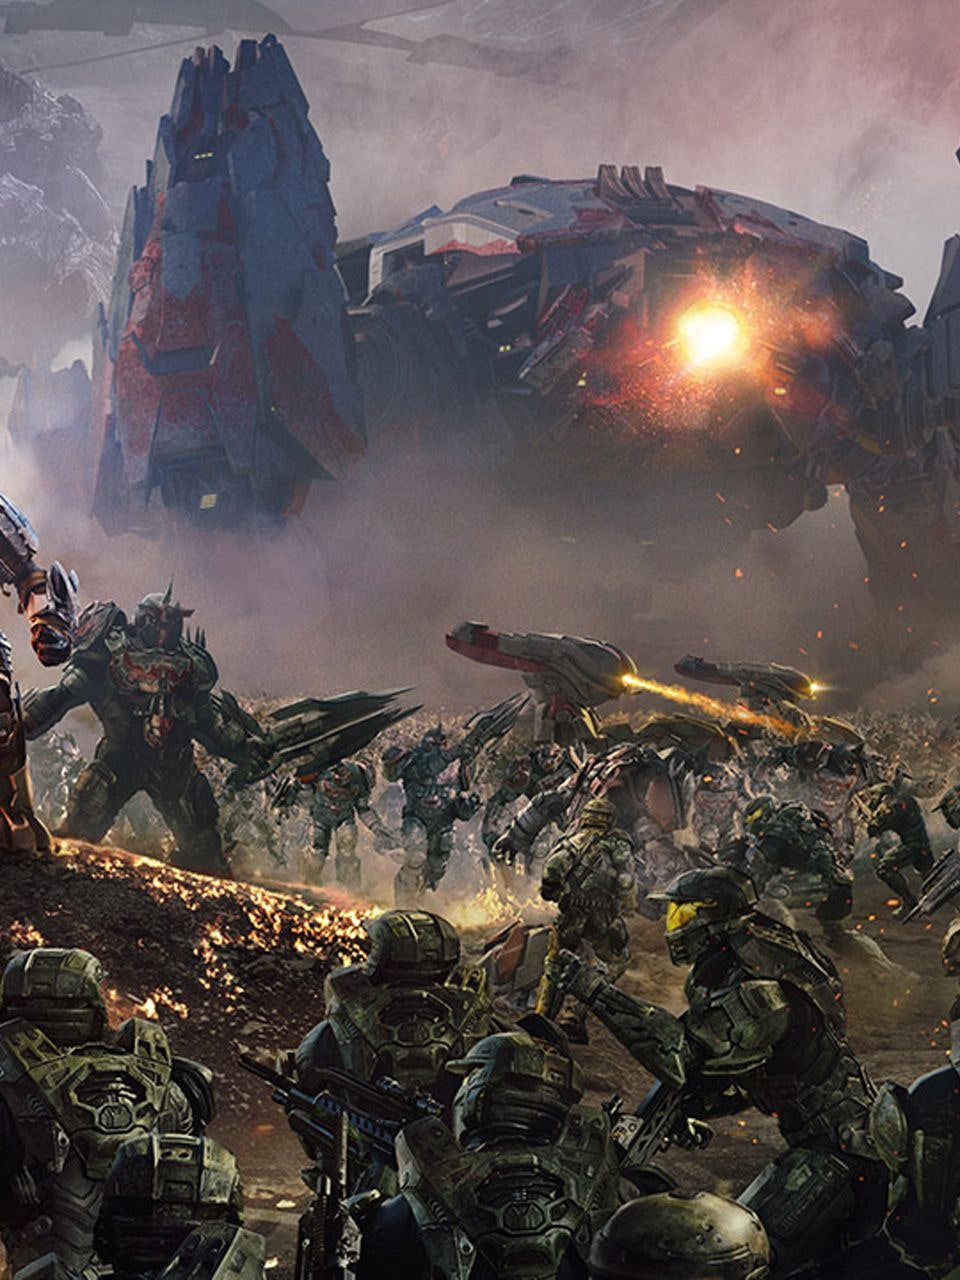 Halo Wars Wallpapers